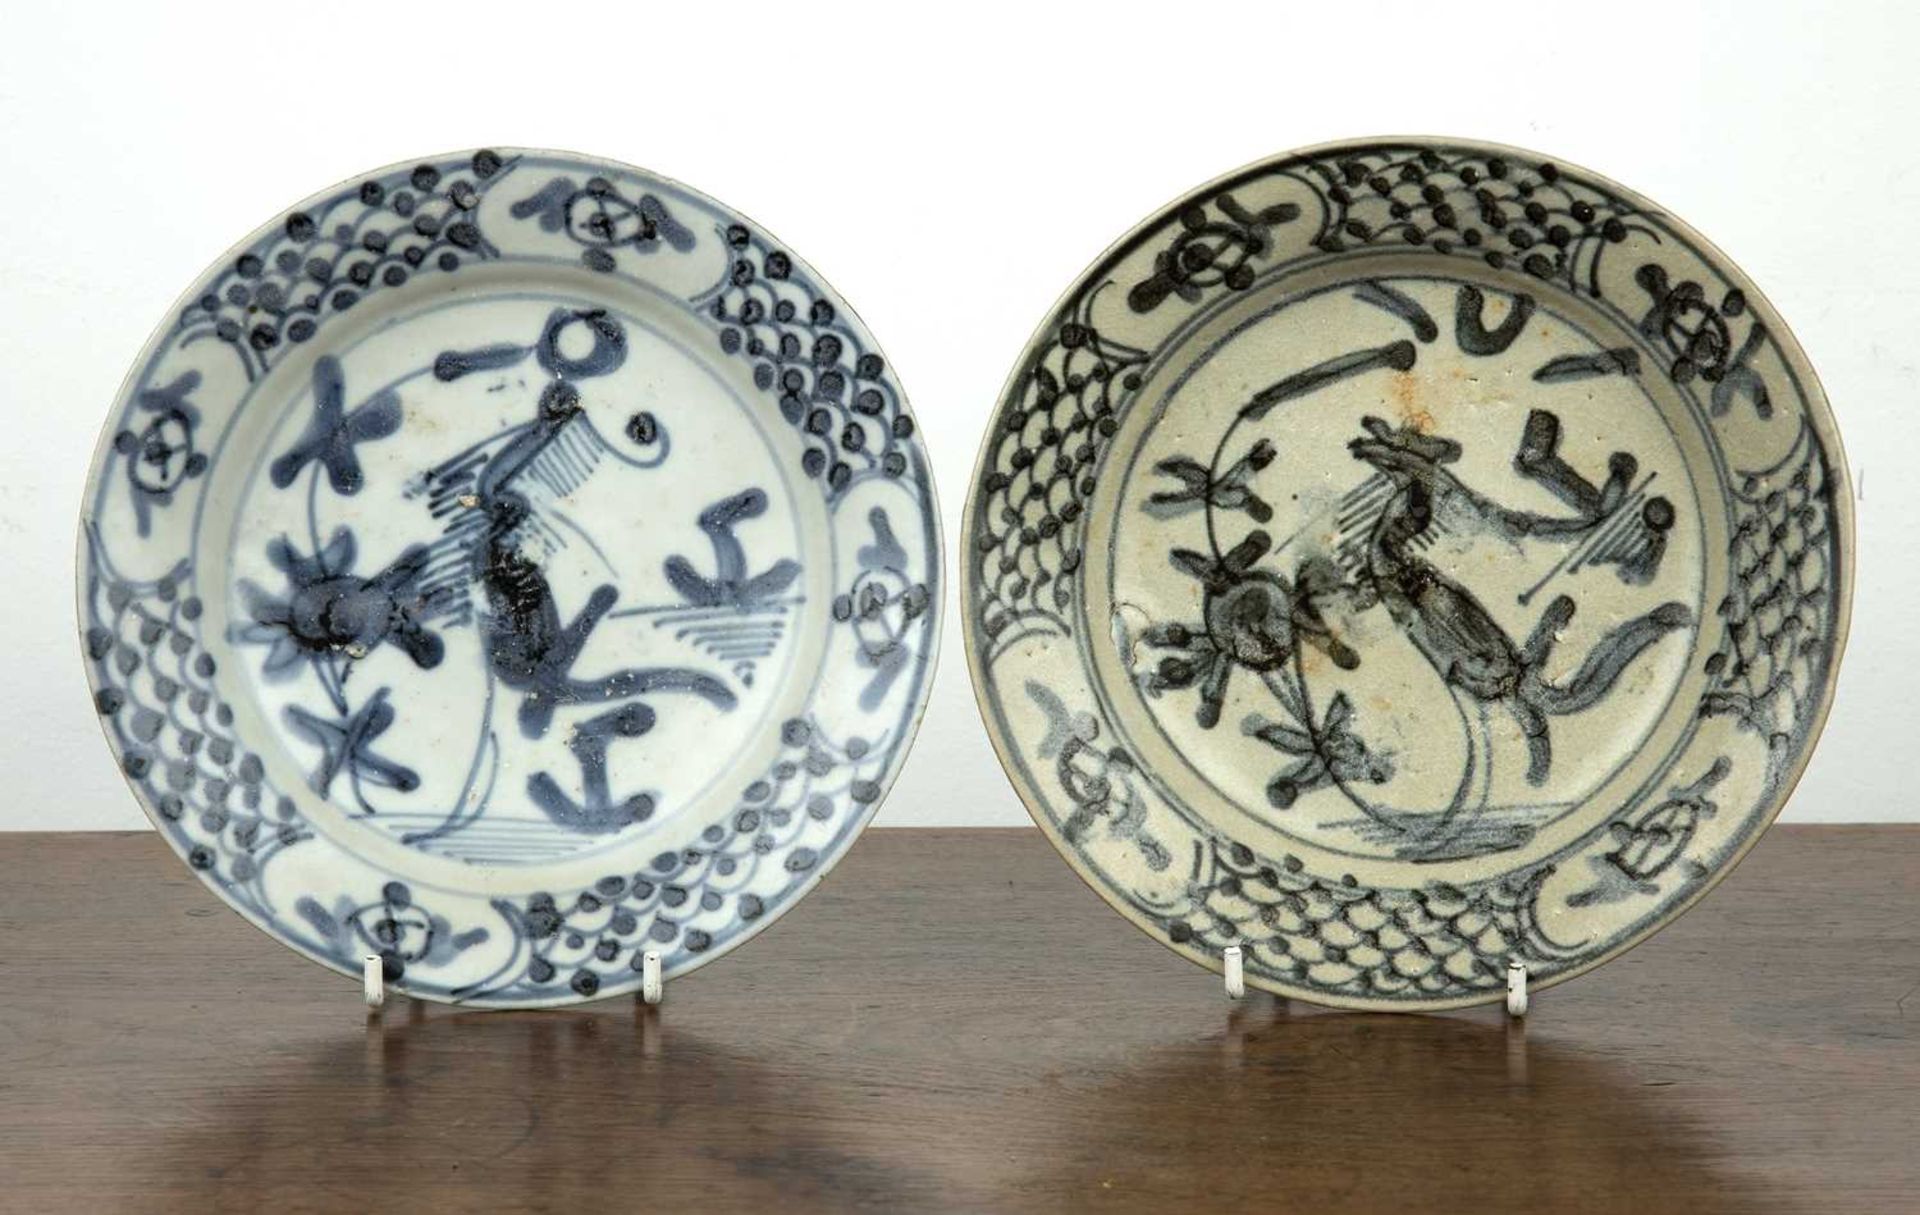 Two blue and white Binh Thuan (Shipwreck) dishes Vietnamese, possibly 15th or 16th century depicting